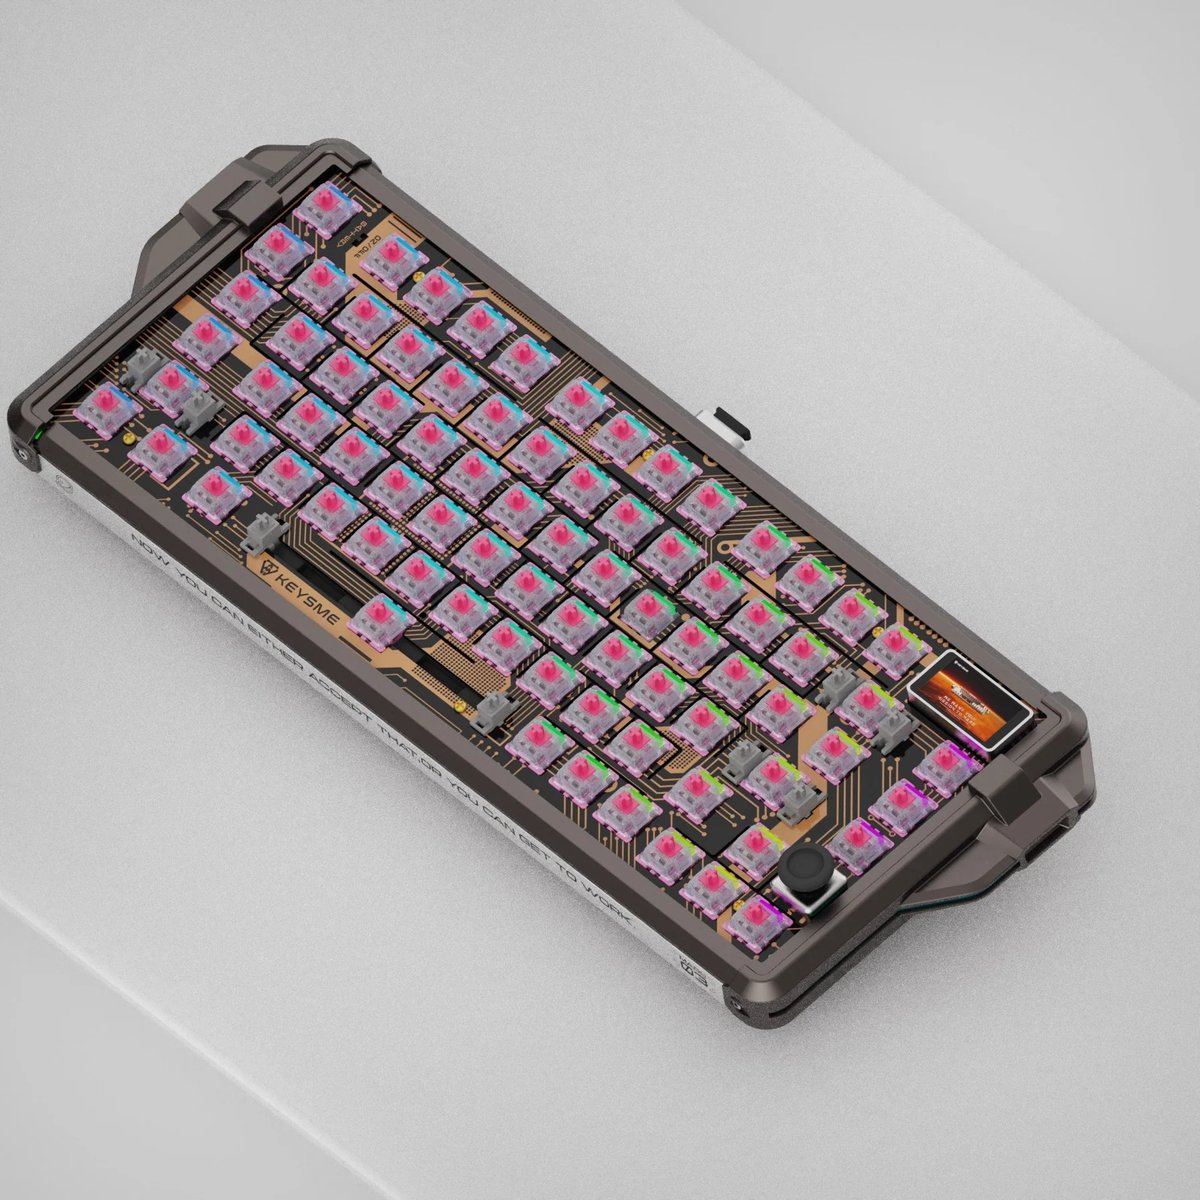 Mars 03: The Ultimate Wireless Mechanical Keyboard

Take your gaming experience to new heights with the Keysme Mars 03 Wireless Custom Mechanical Keyboard. Engineered for performance and precision.

Buy Link: keysme.com/products/keysm…

#KeysMe #MaRs03